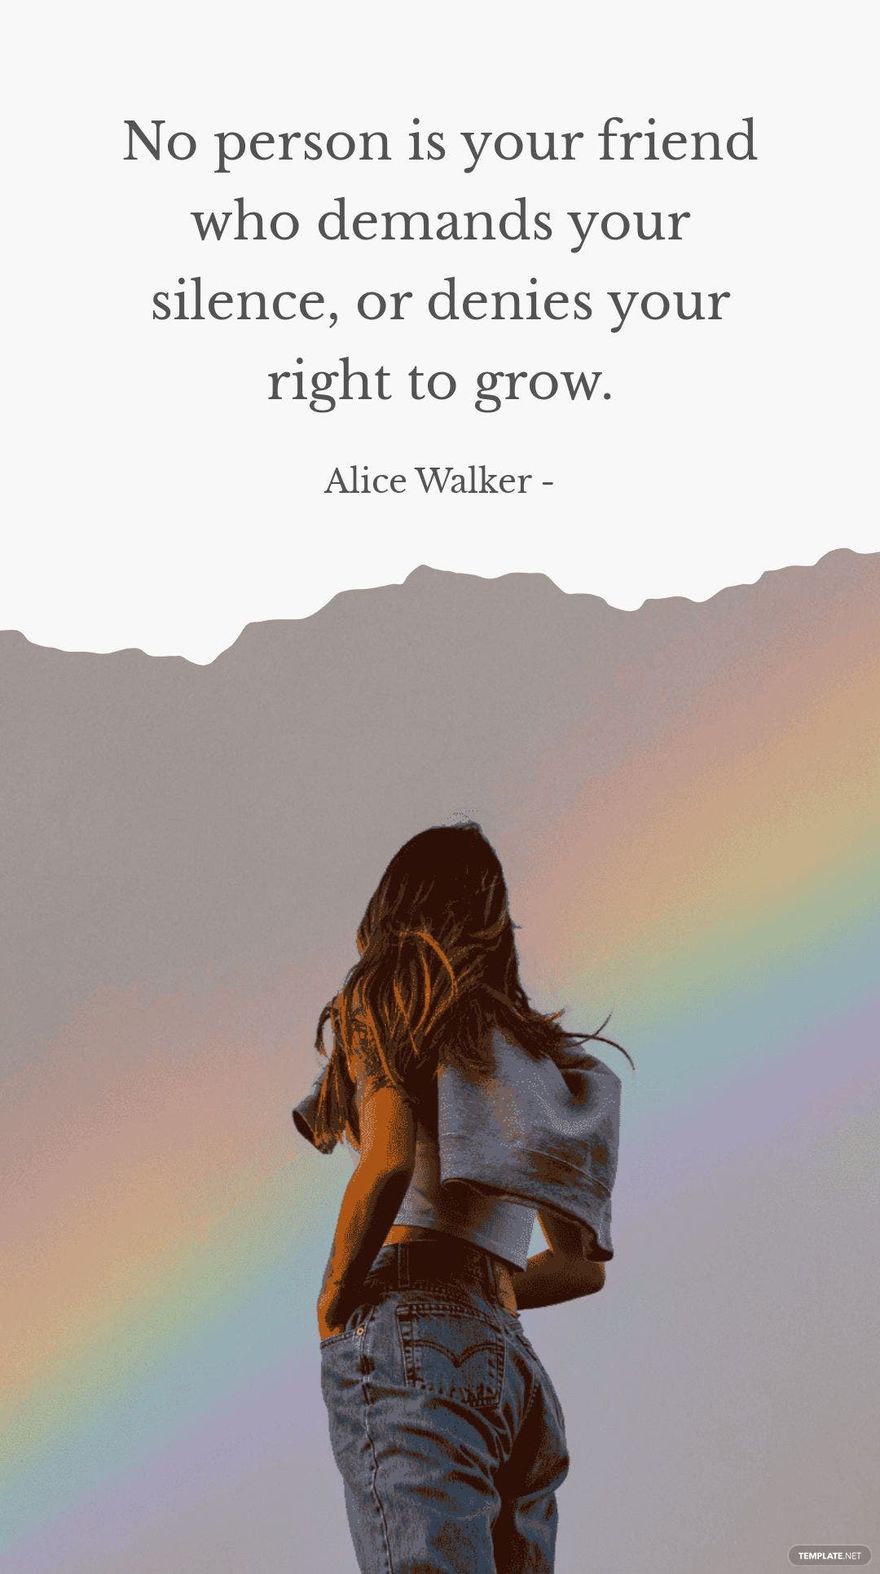 Alice Walker - No person is your friend who demands your silence, or denies your right to grow.